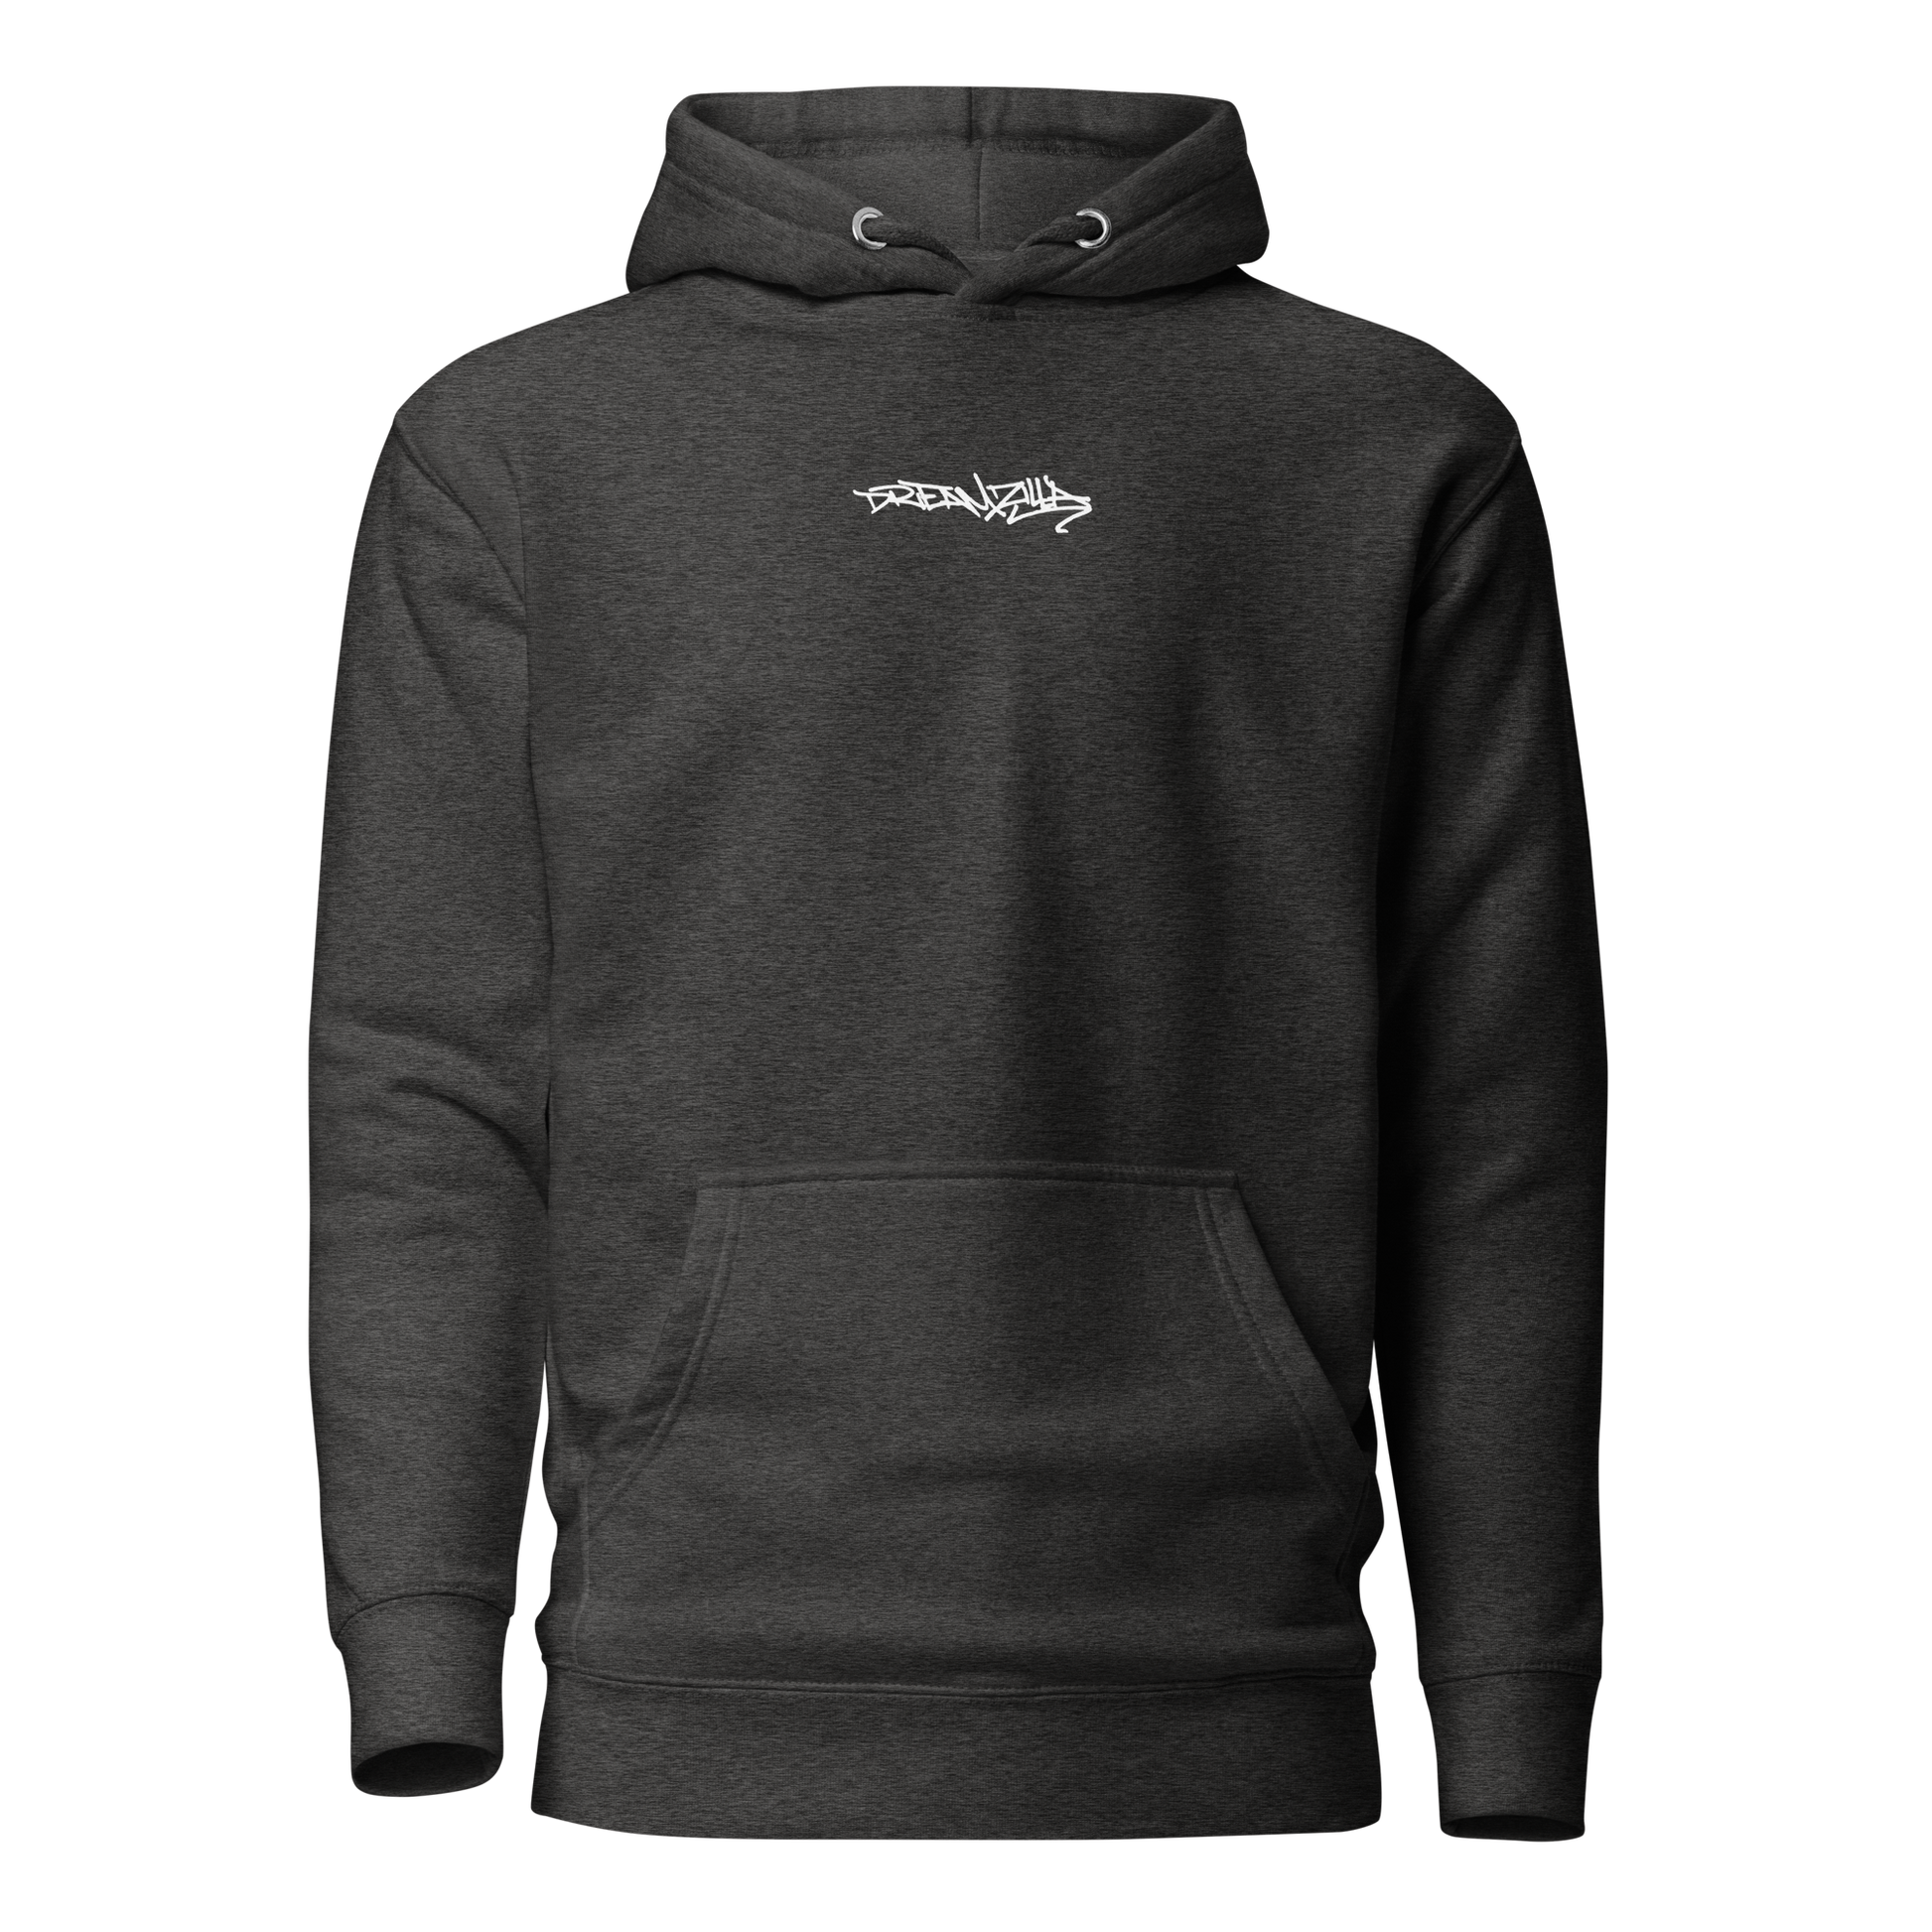 Graffiti Tag+Wildstyle by Sanitor Unisex Hoodie in Charcoal Heather